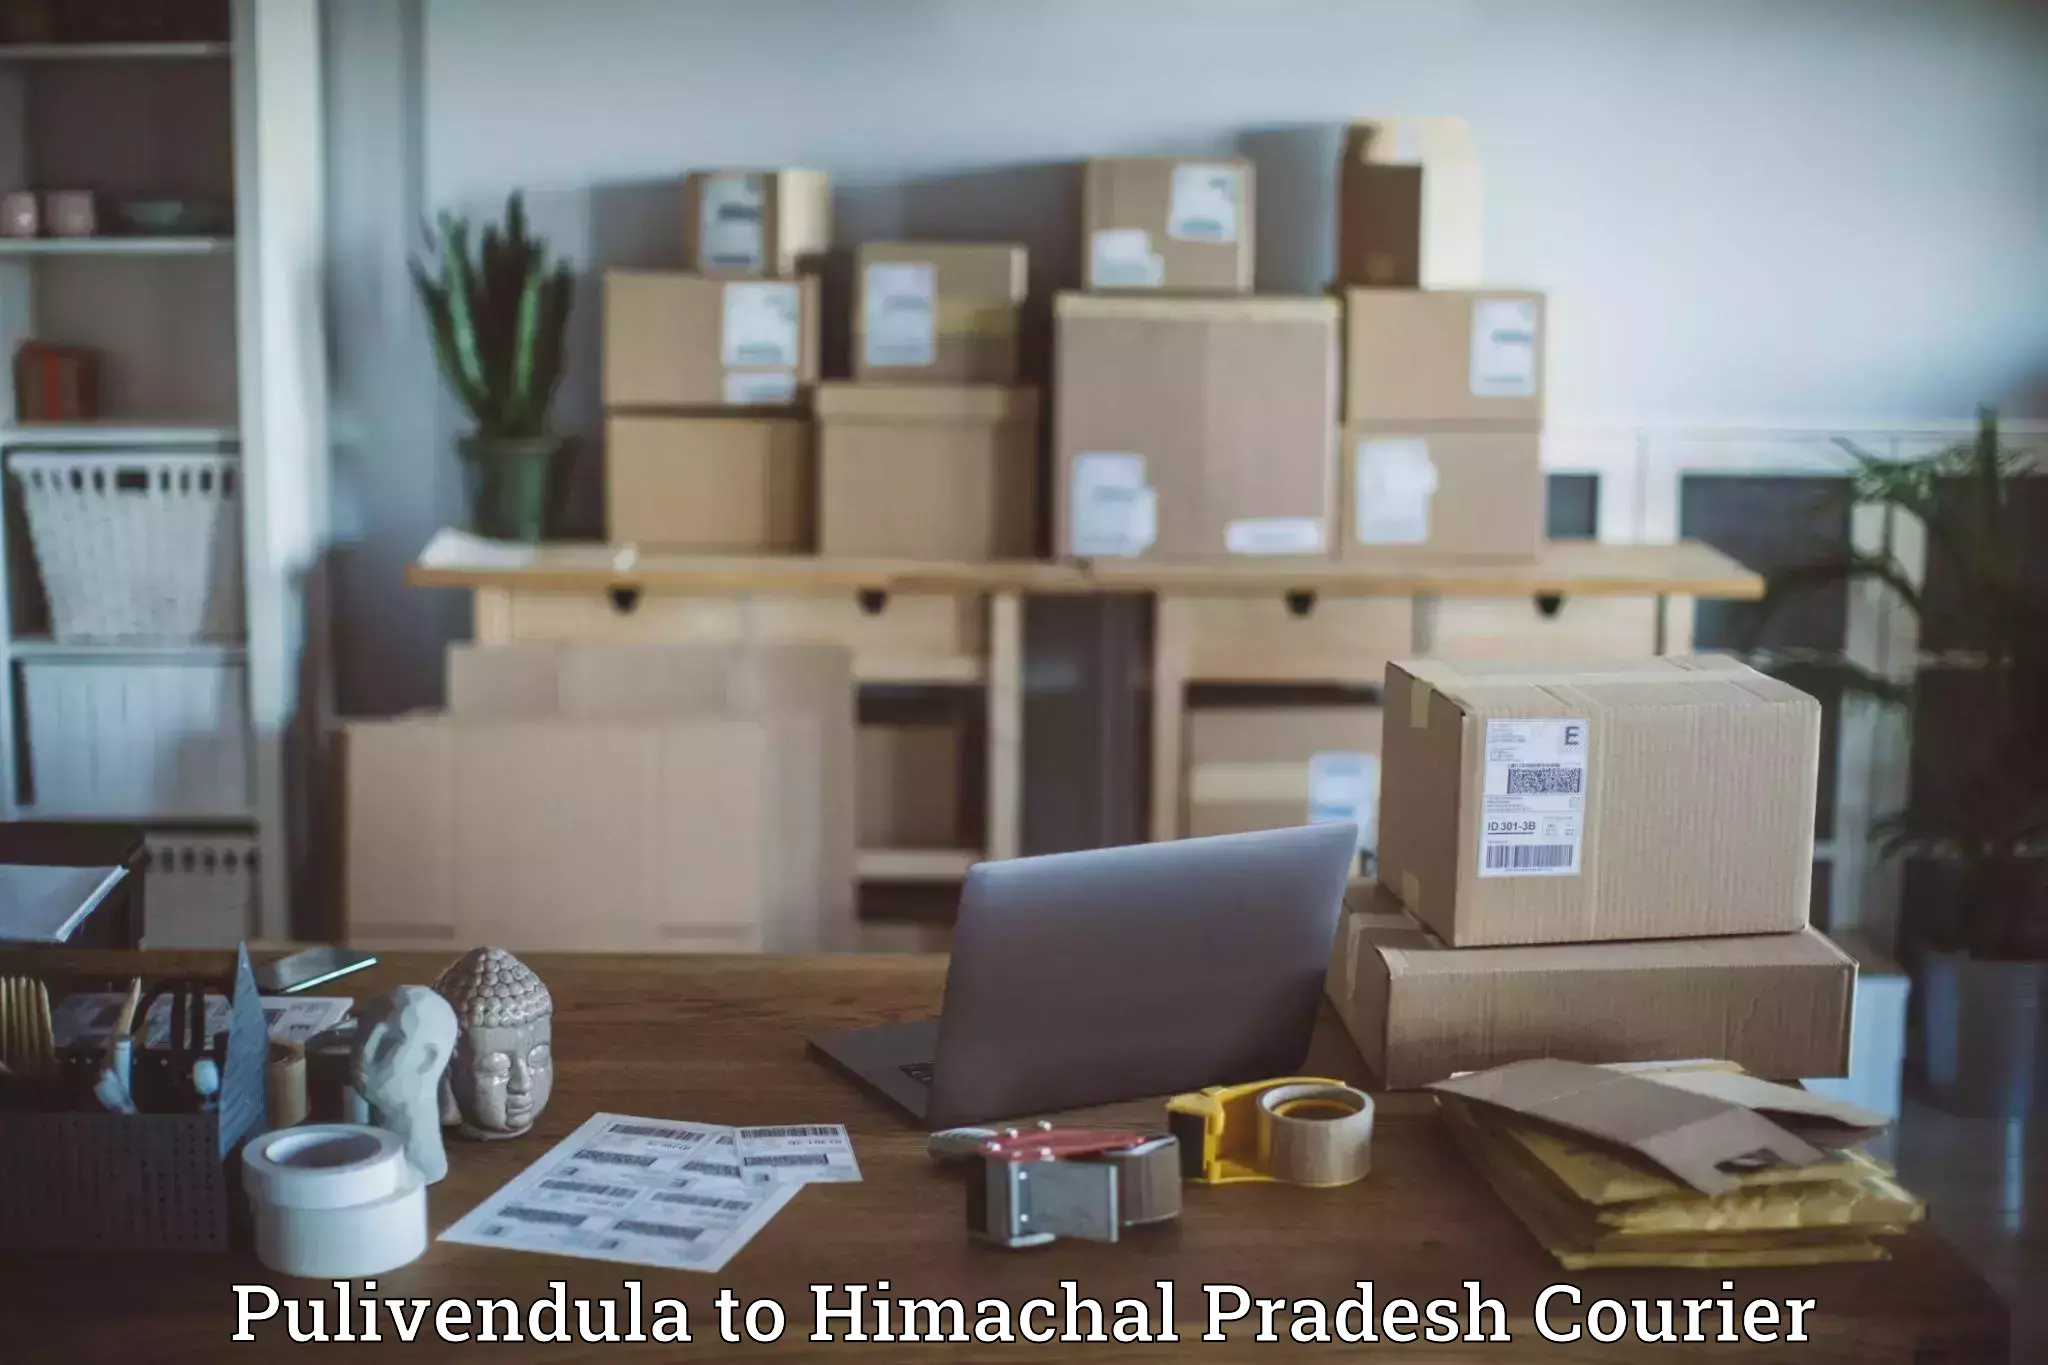 Professional courier handling Pulivendula to Dheera